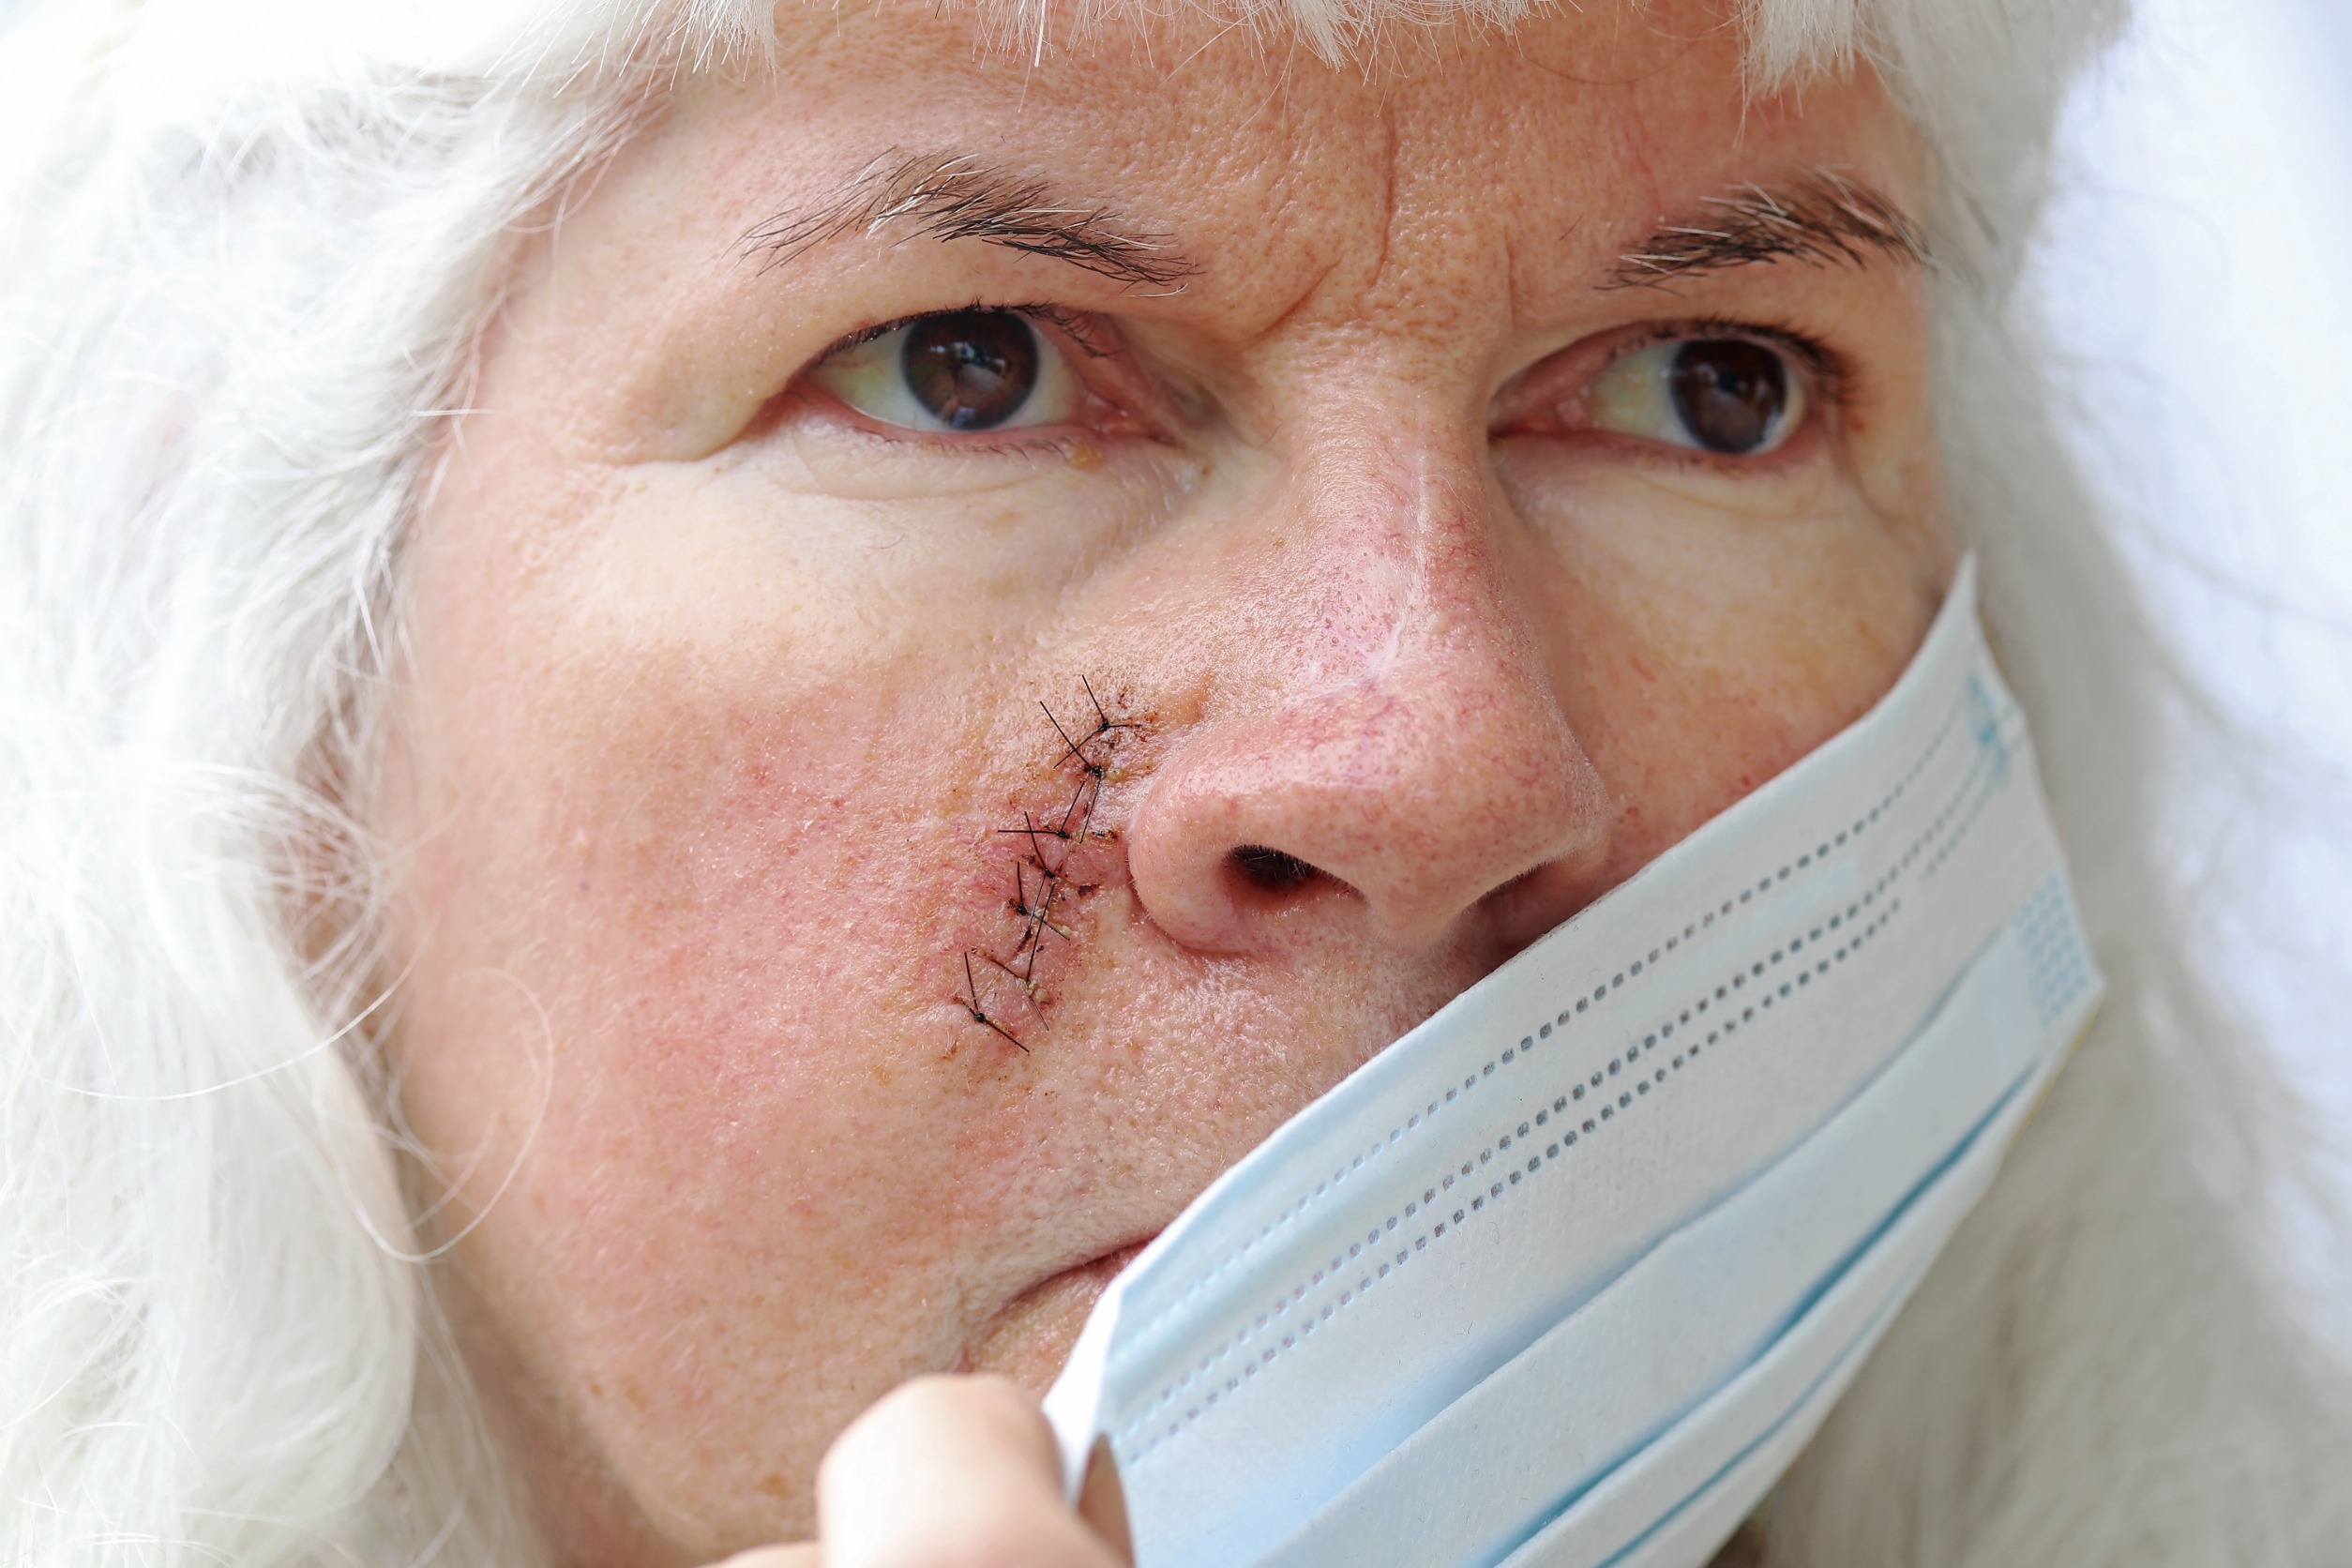 Woman With Stitches On Her Face That Will Cause A Scarring Injury. 